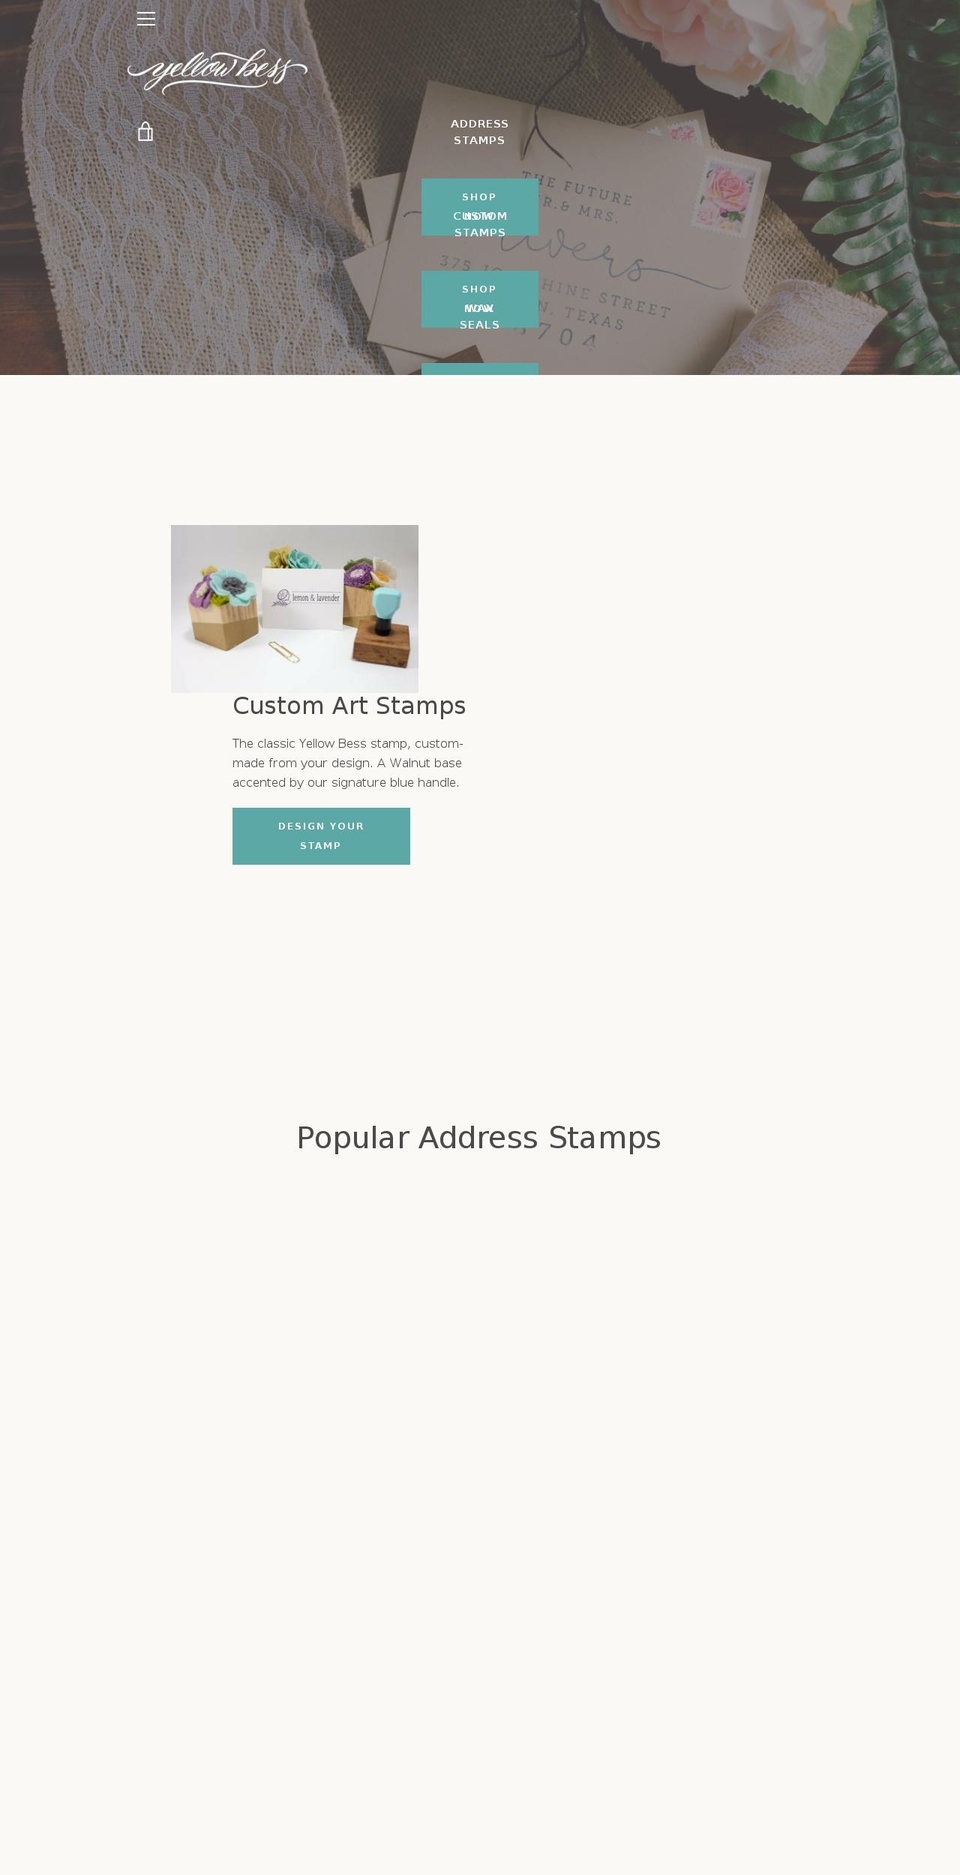 Story Shopify theme site example yellowbess.com